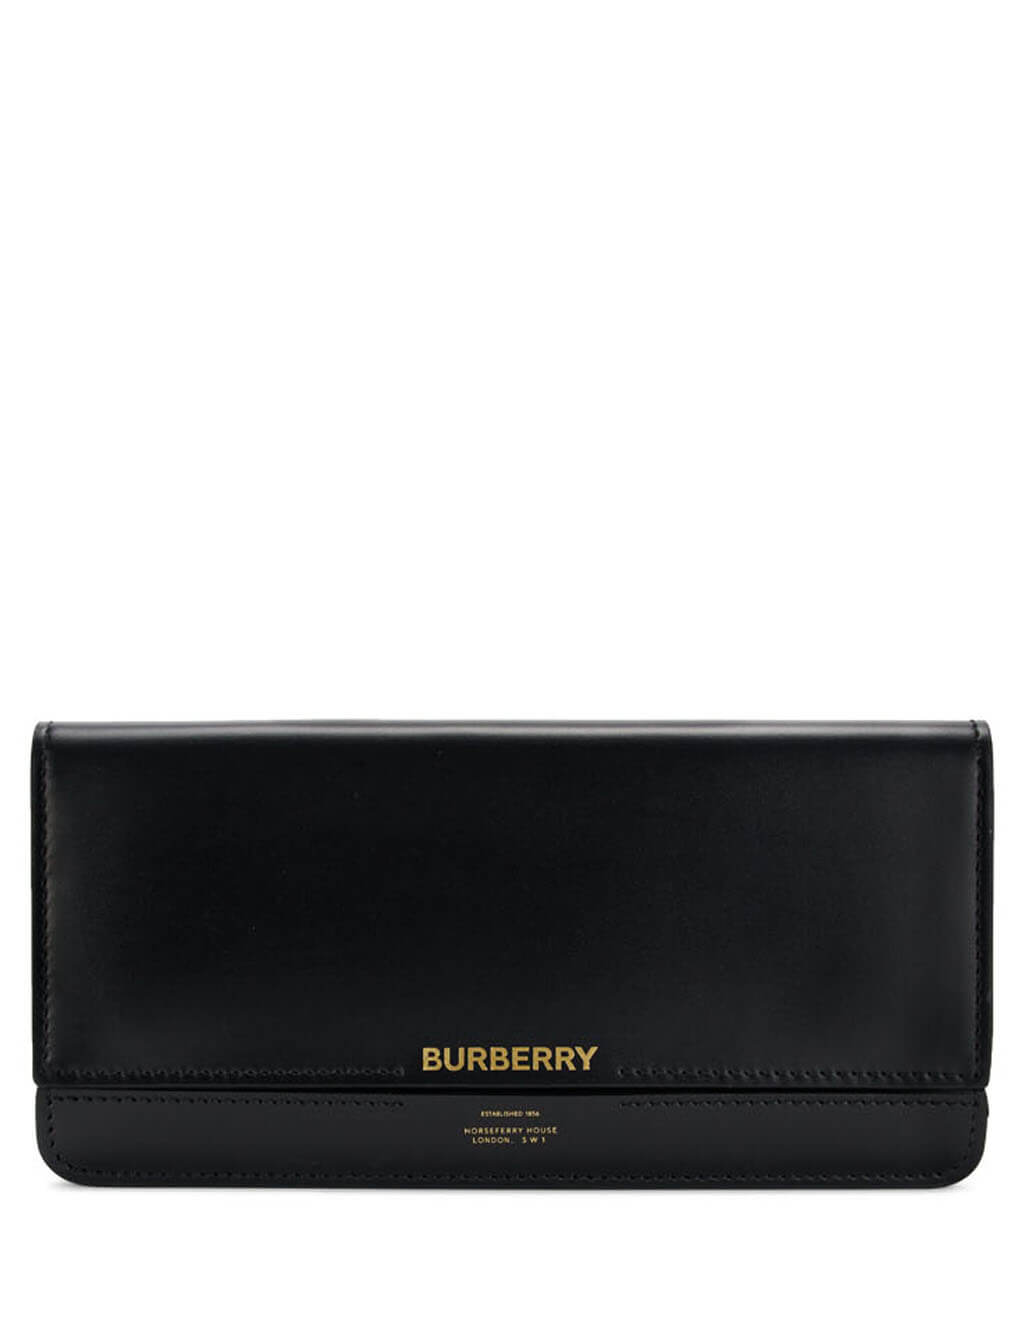 burberry purse and wallet